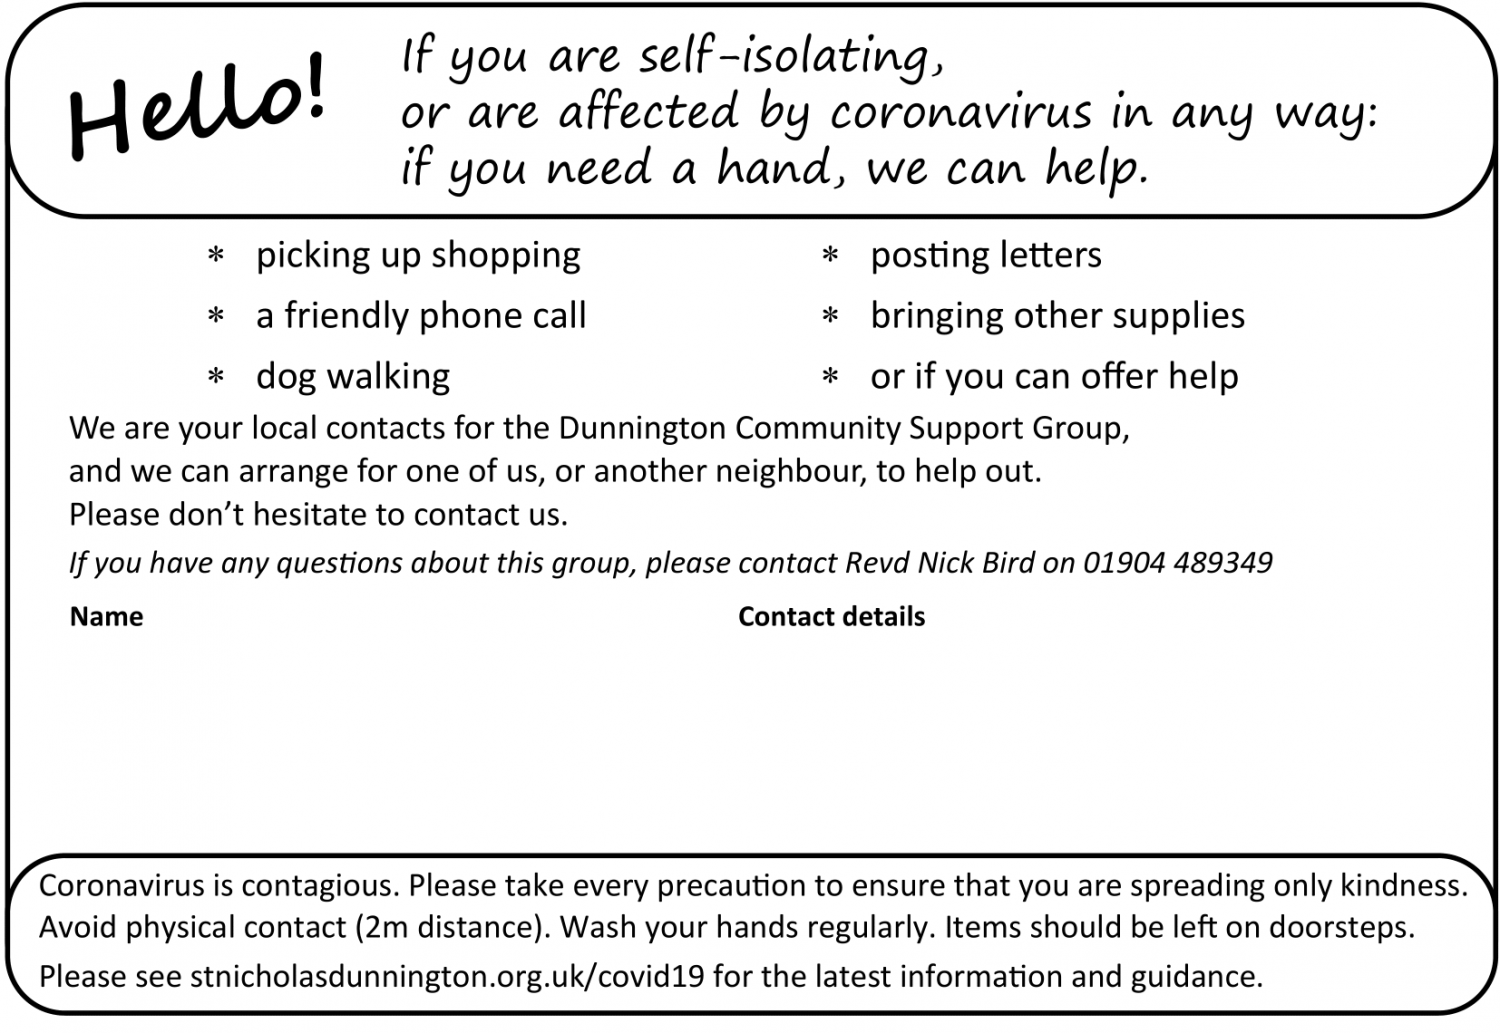 covid-19 support leaflet